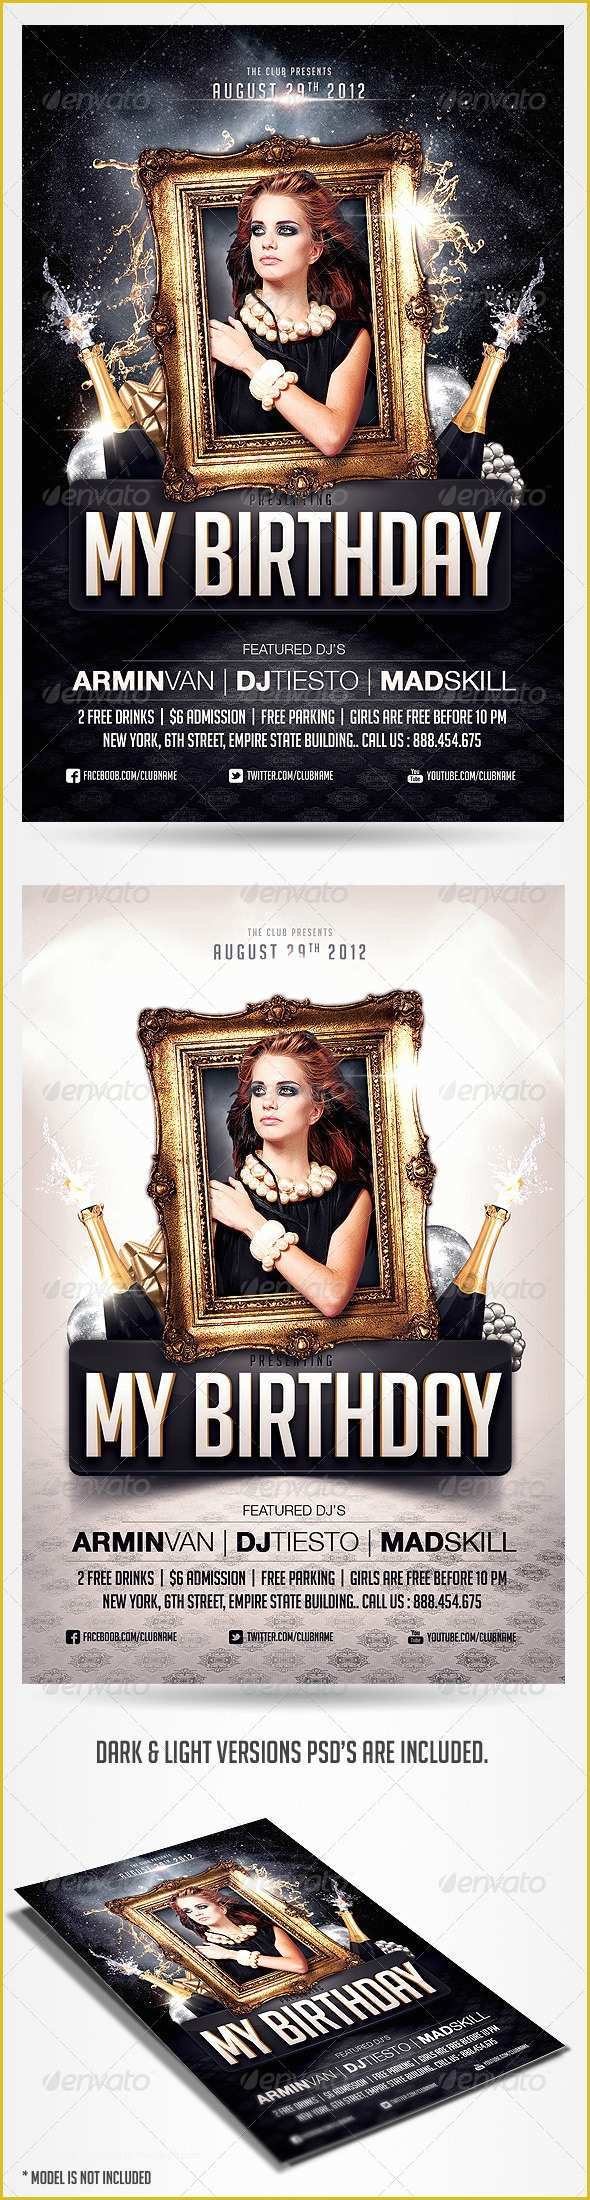 Birthday Party Flyer Templates Free Of Birthday Party Invitation Flyer Template by Saltshaker911